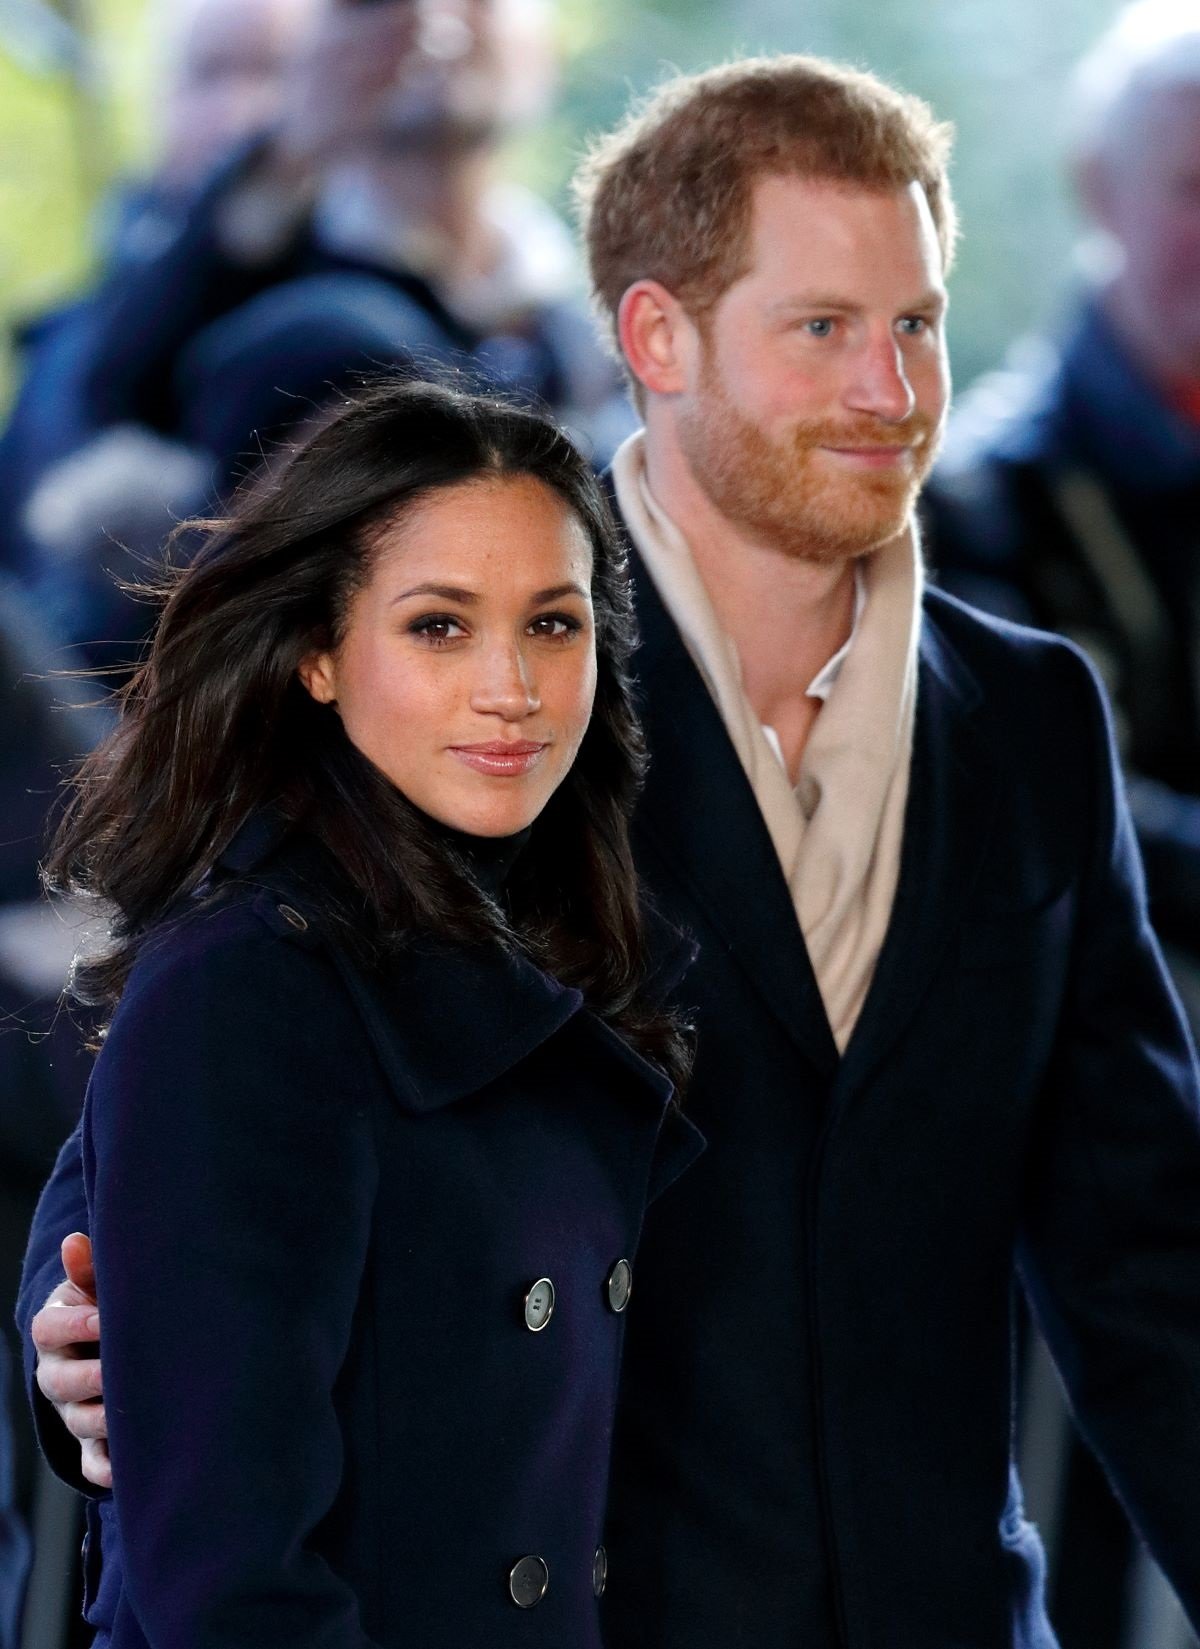 Meghan Markle, who ignored Prince Harry’s dating rule when they started dating, attend a World AIDS Day charity fair together in 2017